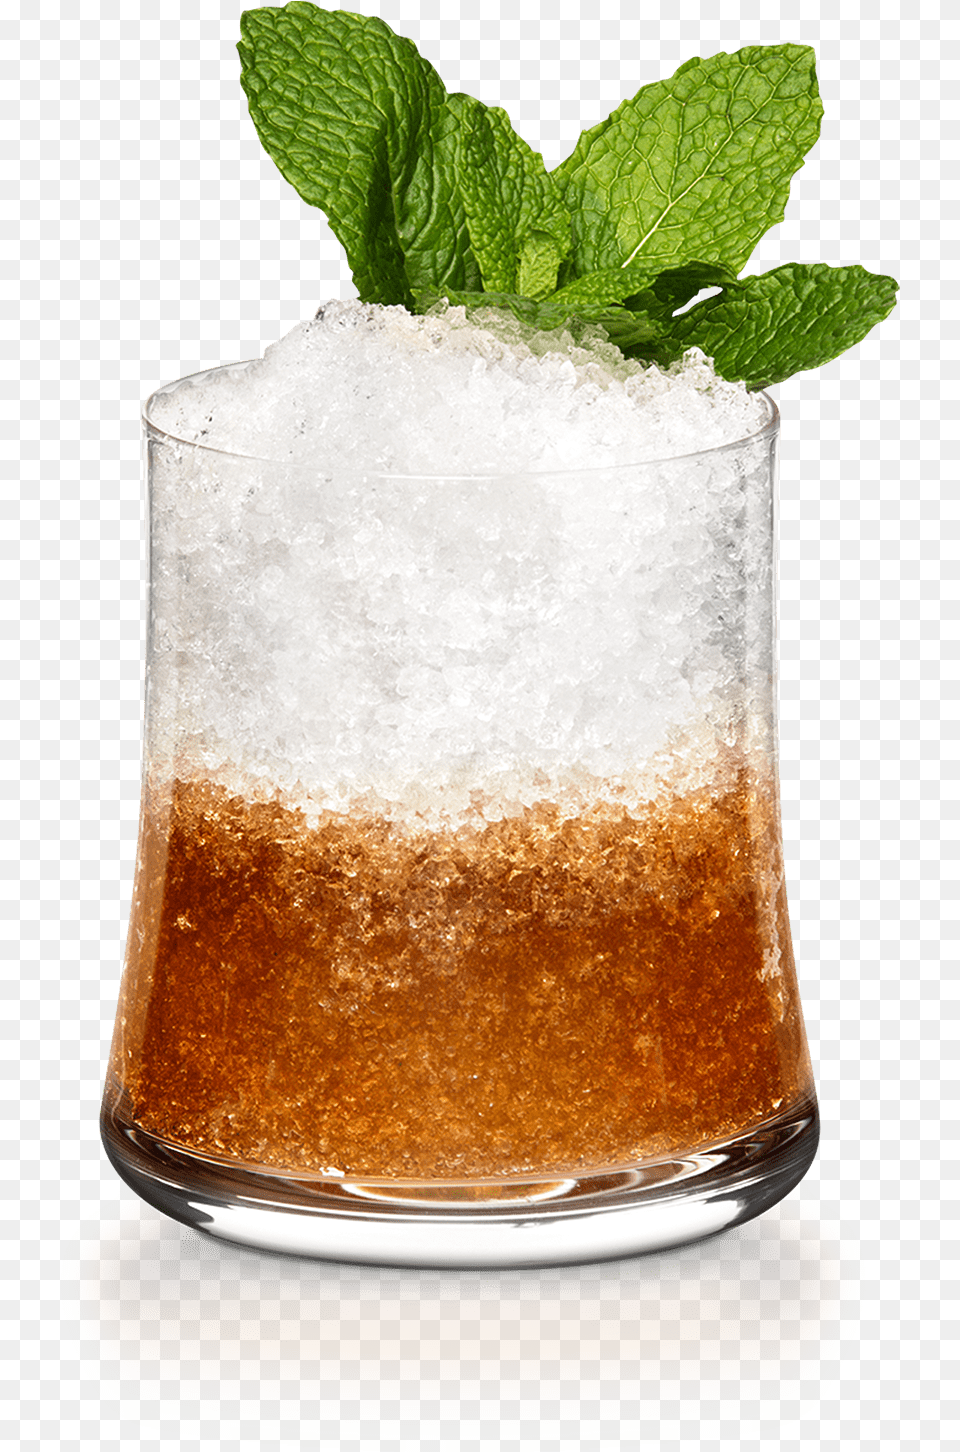 Mint Julep, Herbs, Plant, Alcohol, Beverage Png